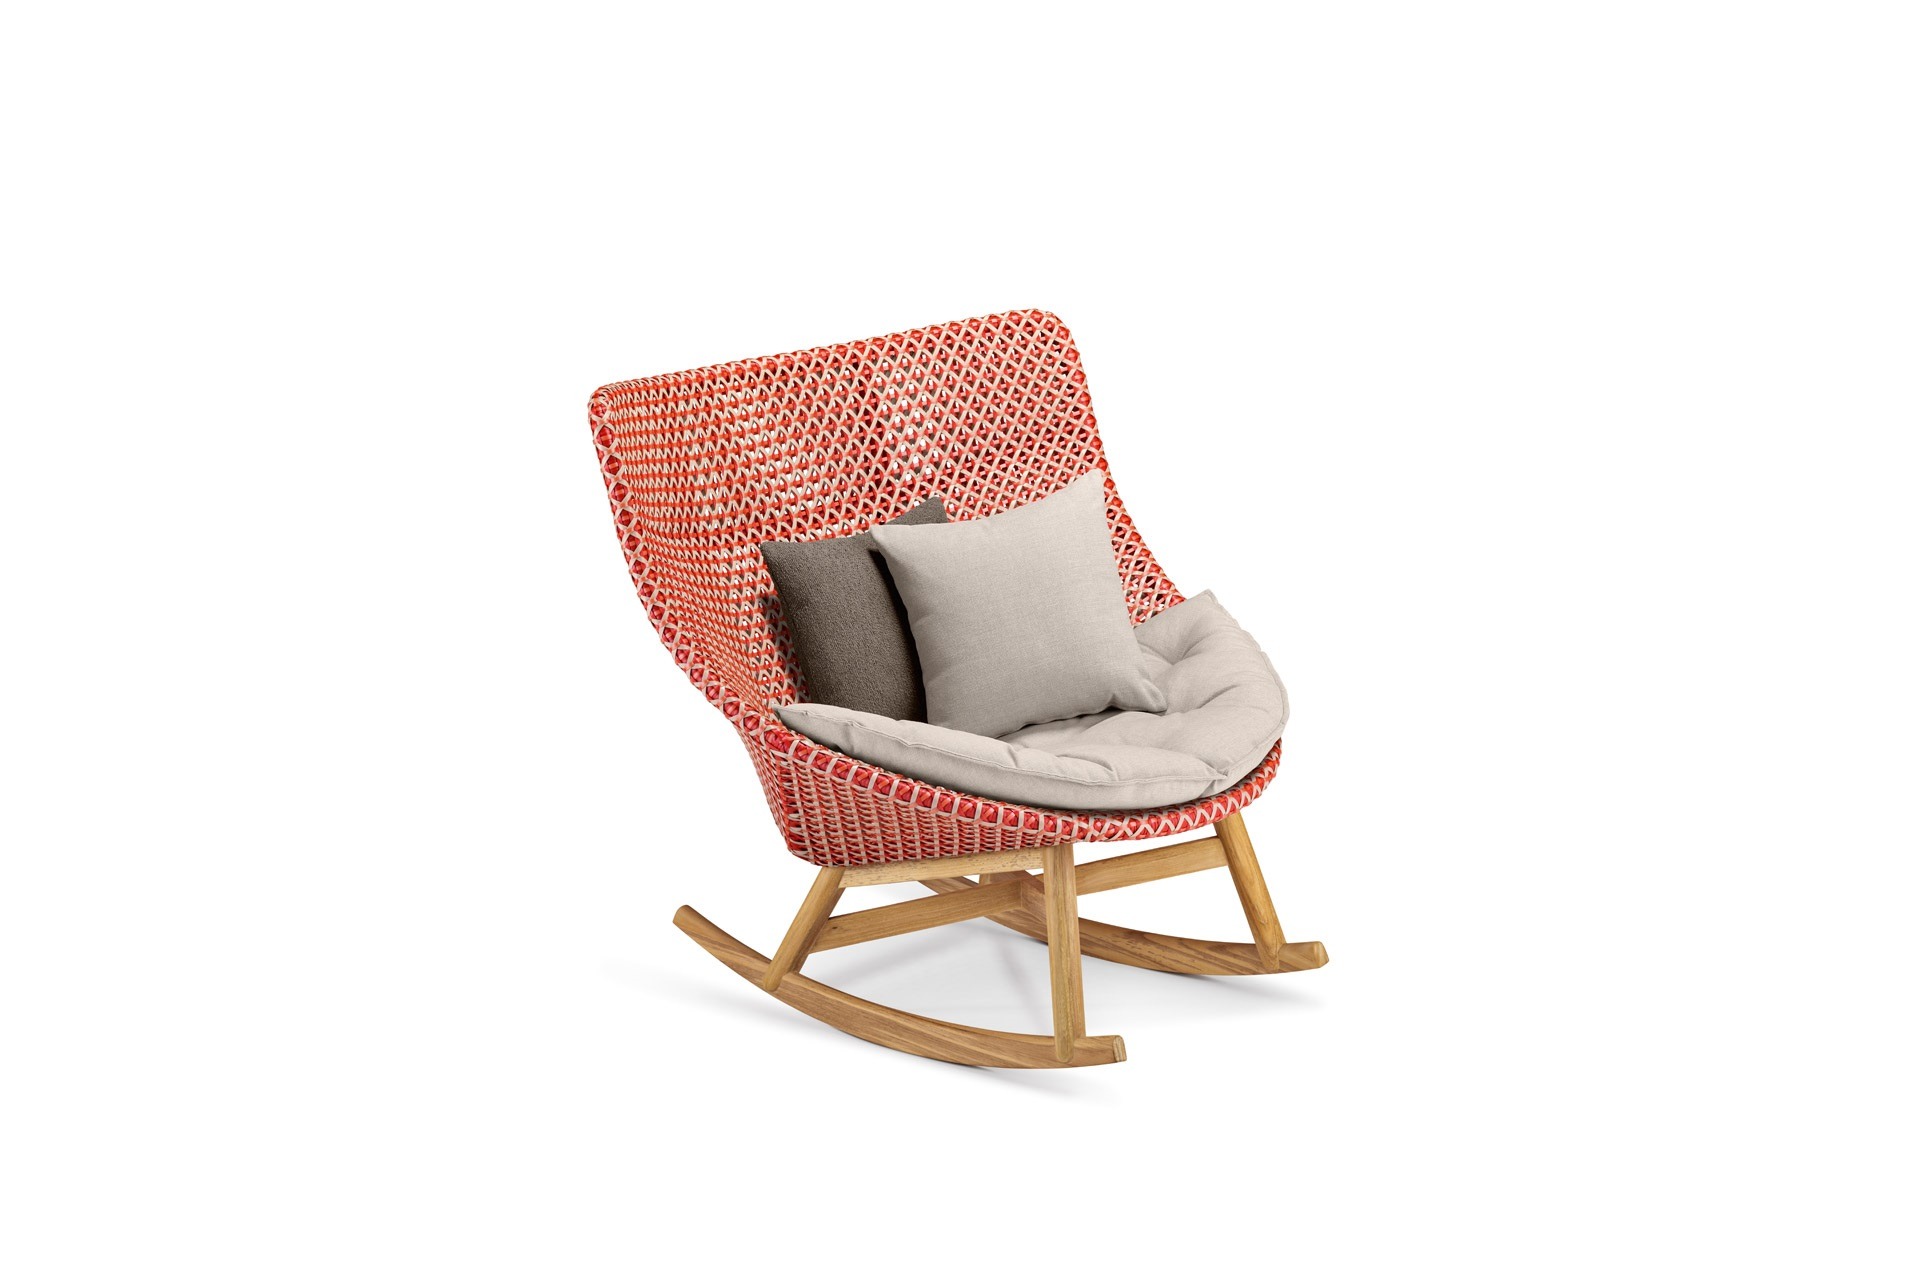 Luxury Mbrace Rockingchair With Cushion By Dedon Affordable